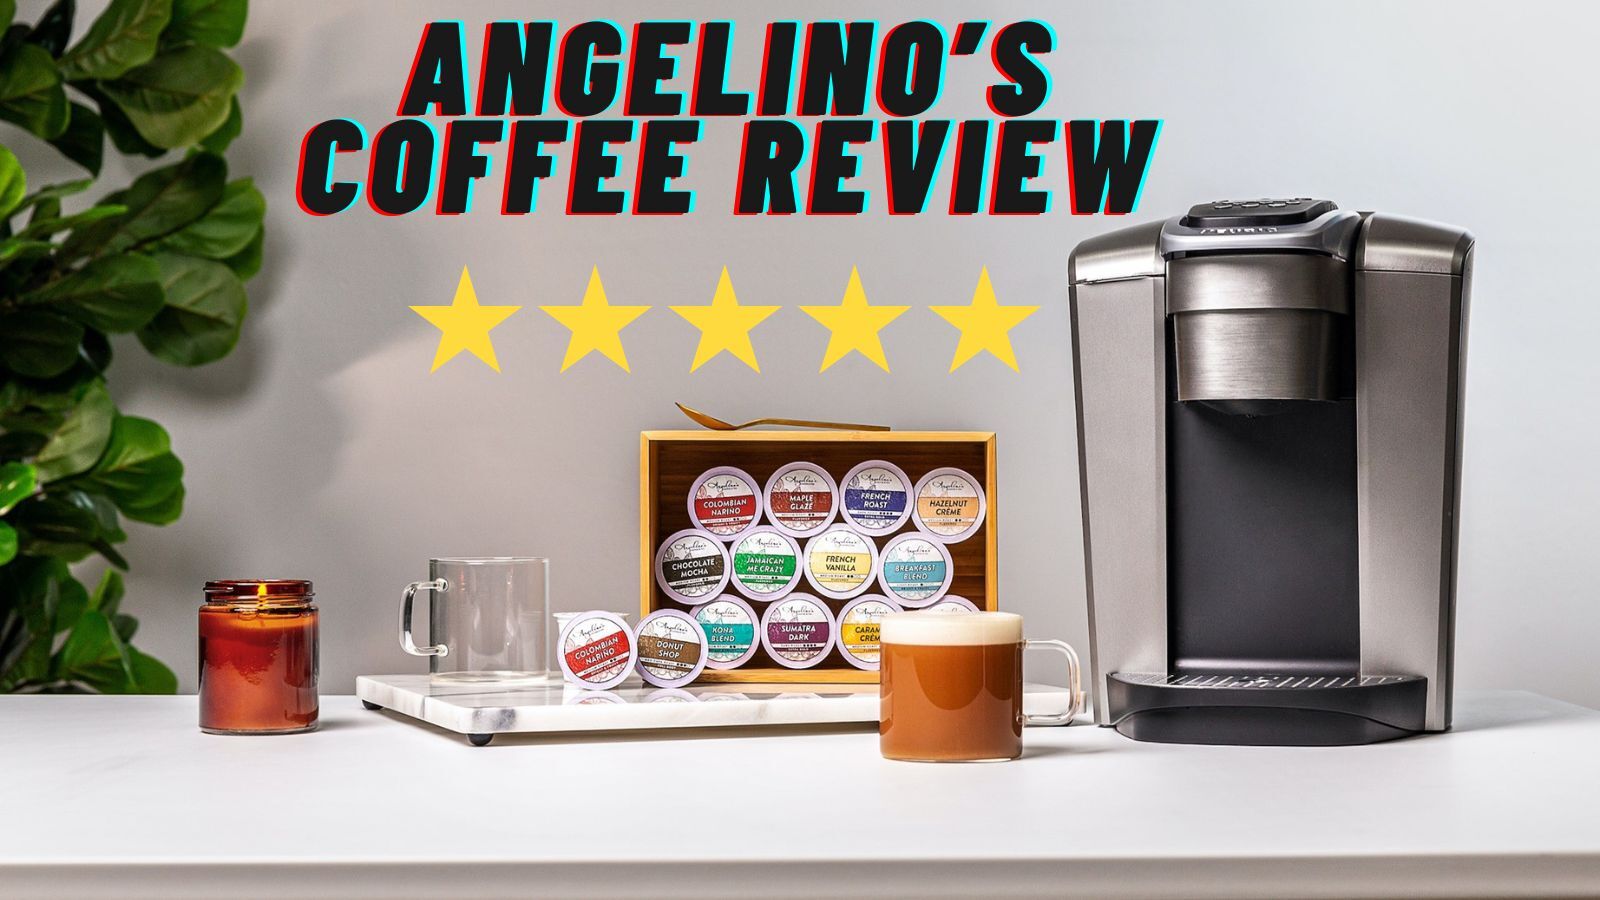 Angelino’s Coffee Review: *Pros and Cons* What Makes It Unique?